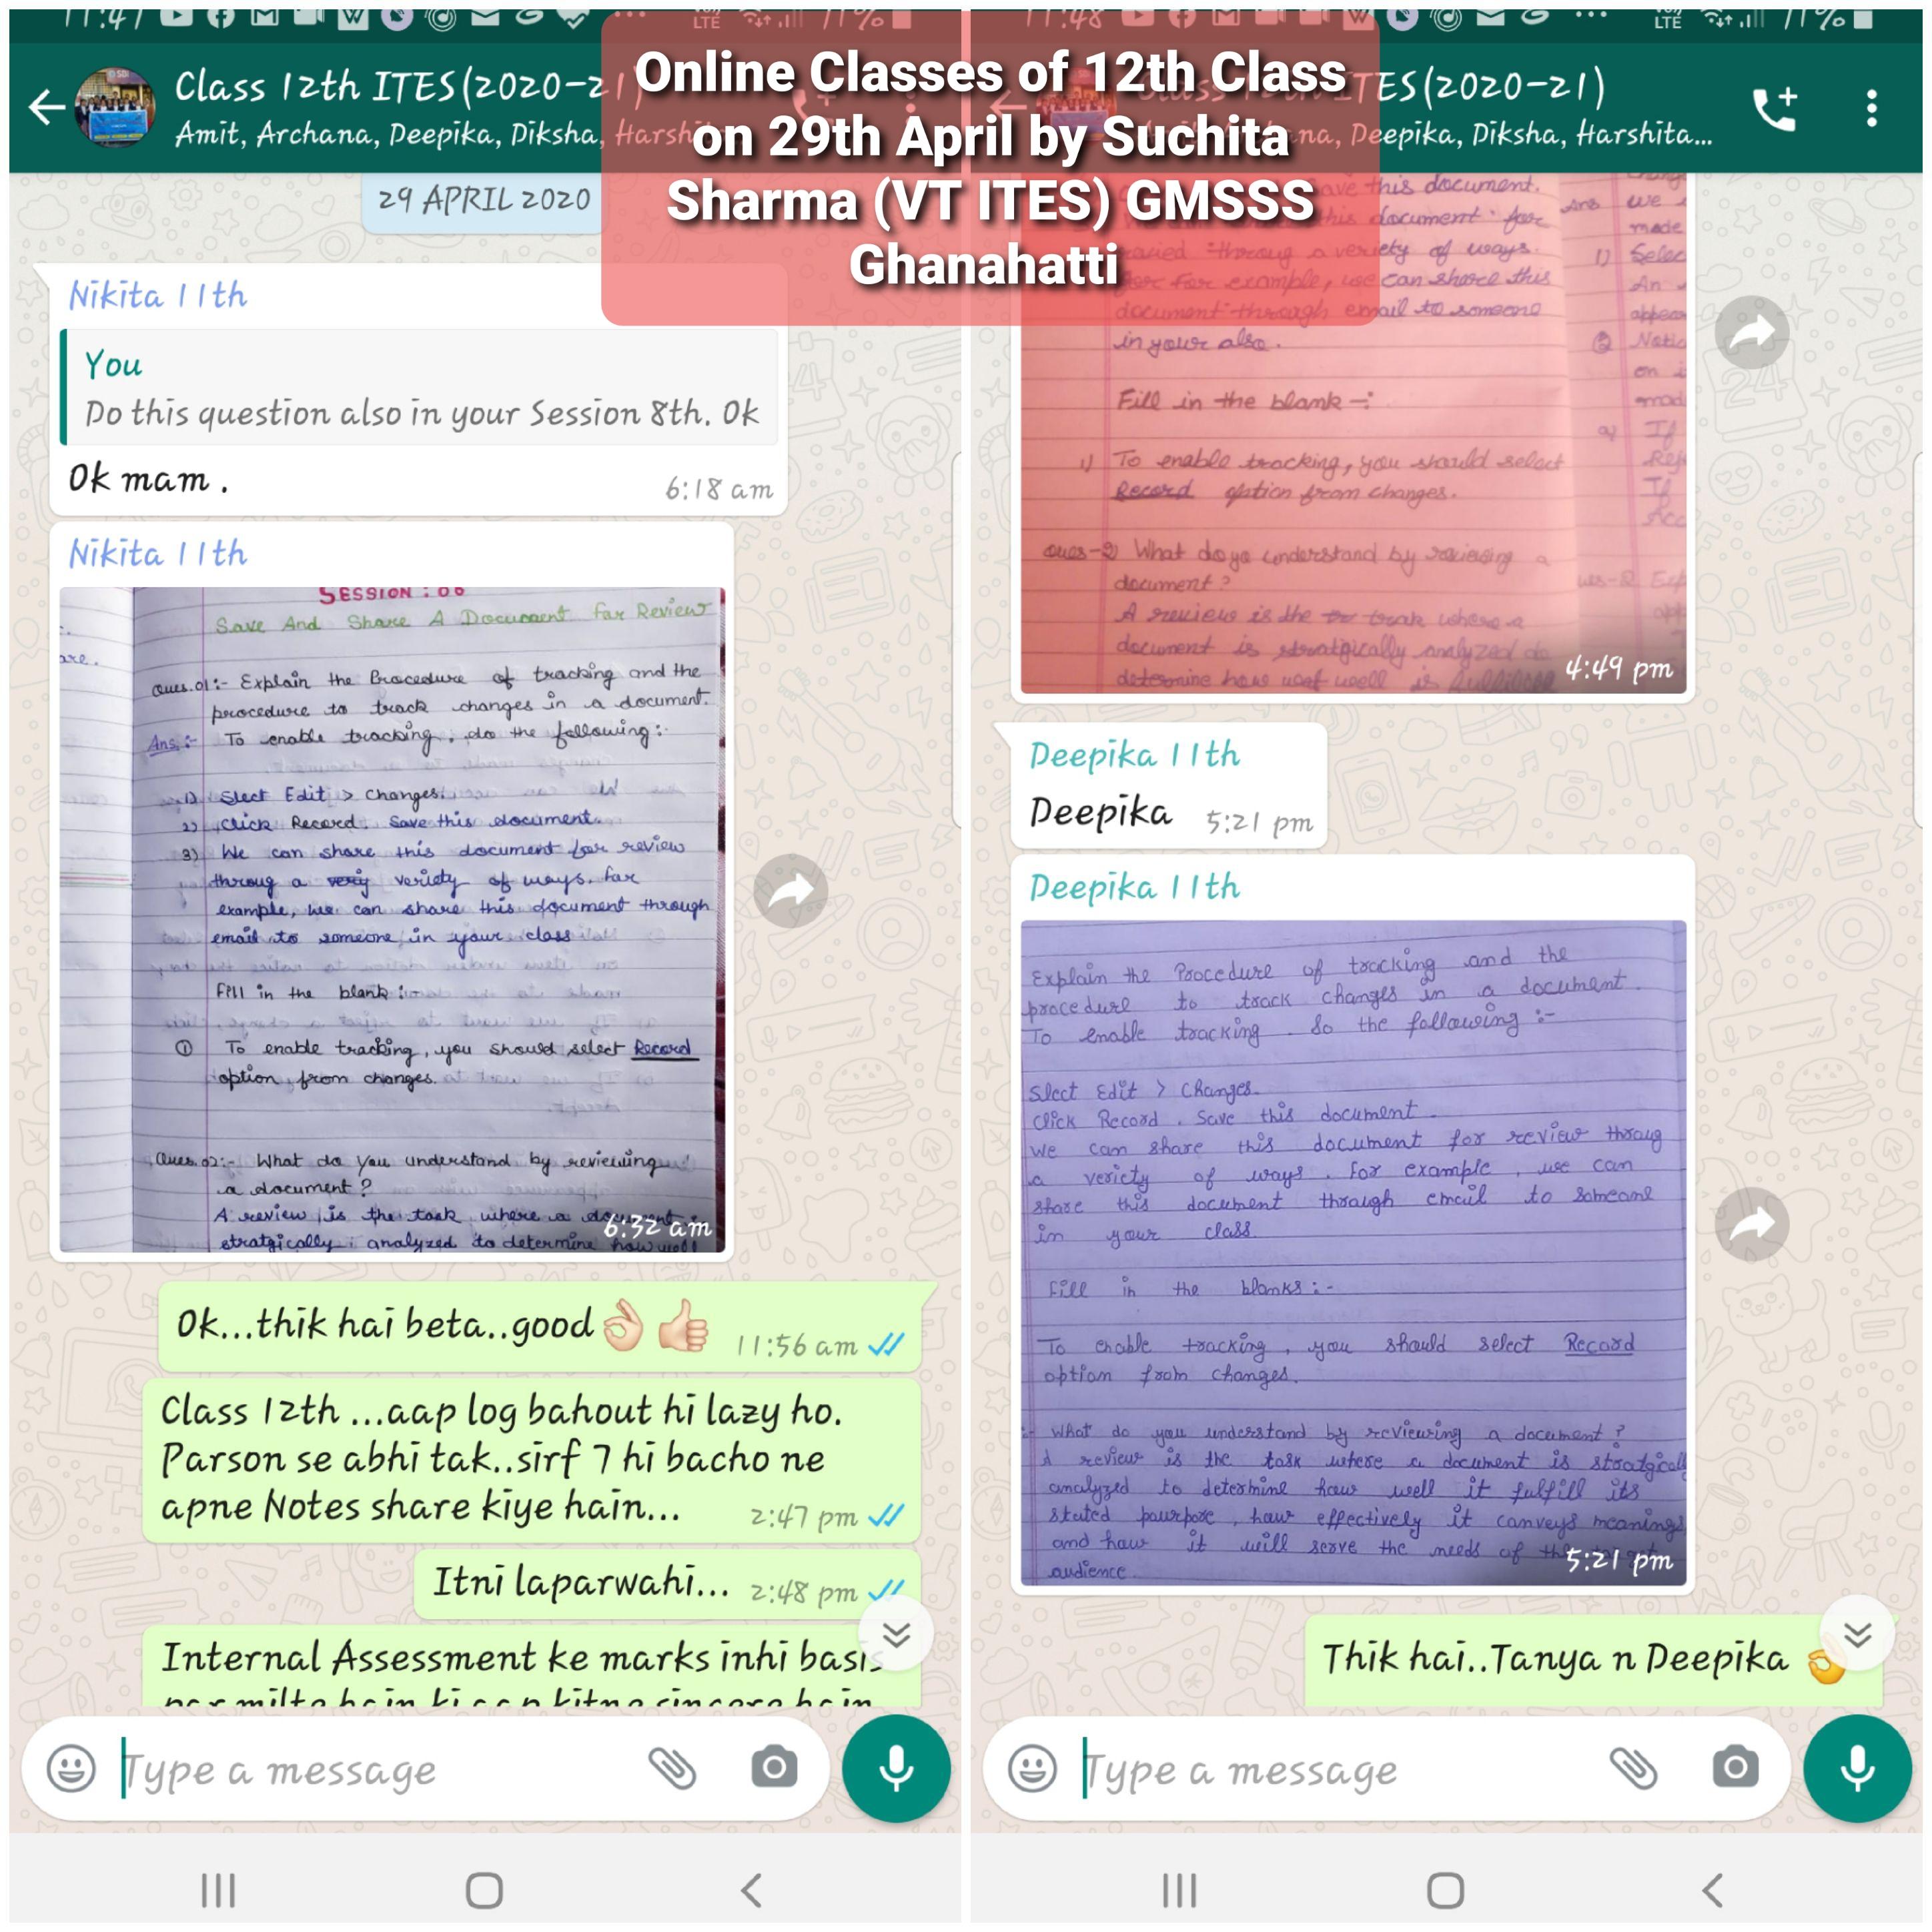 Online Classes of Class 12th - Fourth Week 